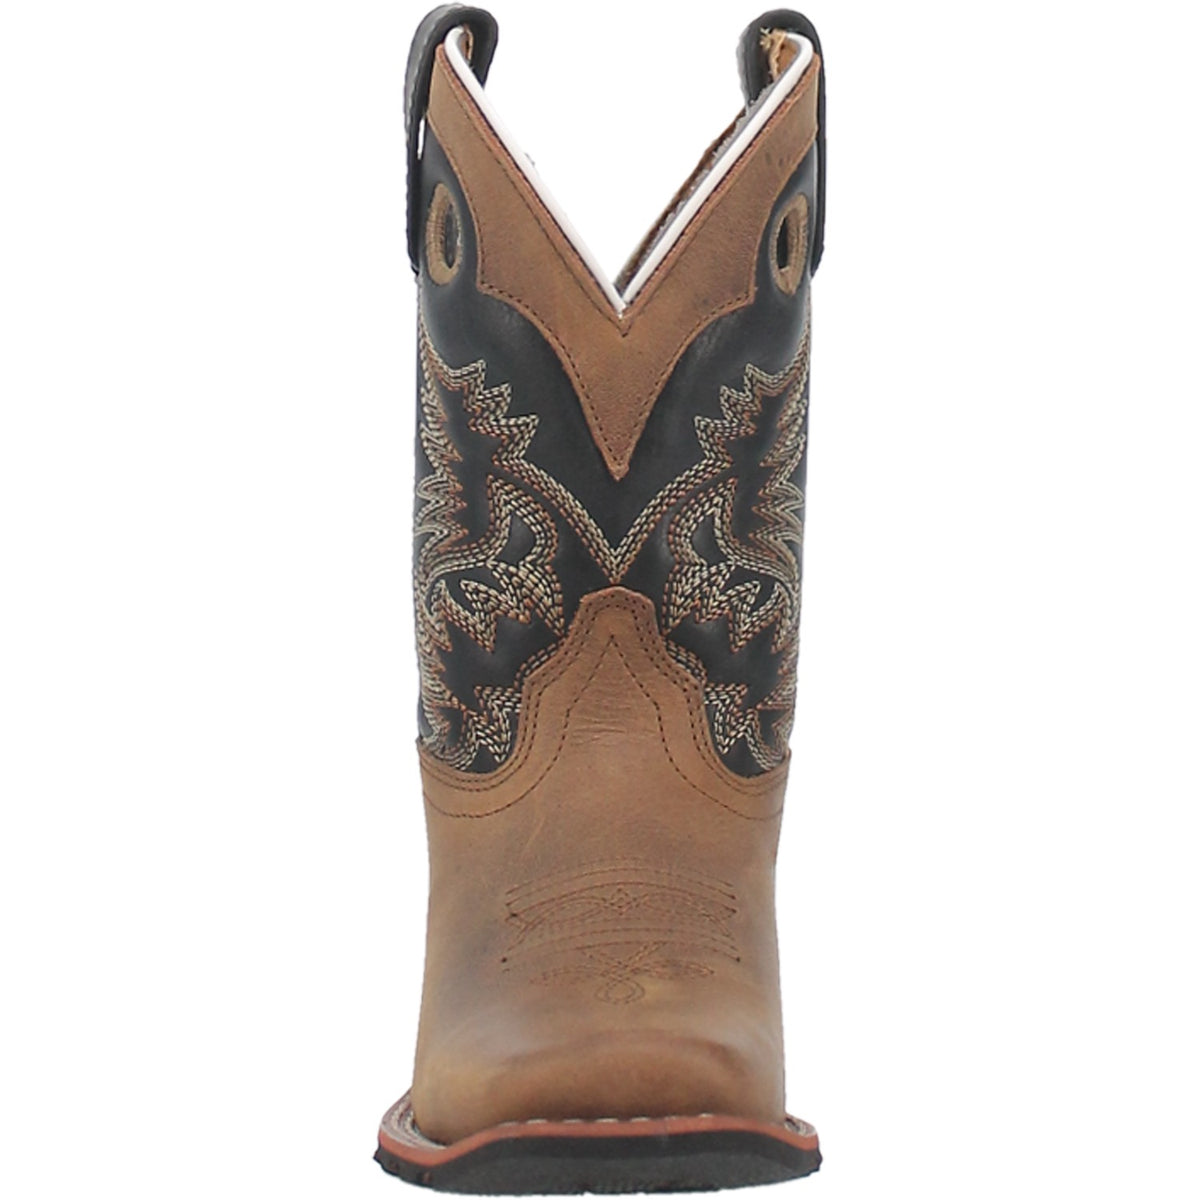 RASCAL LEATHER CHILDREN'S BOOT Cover